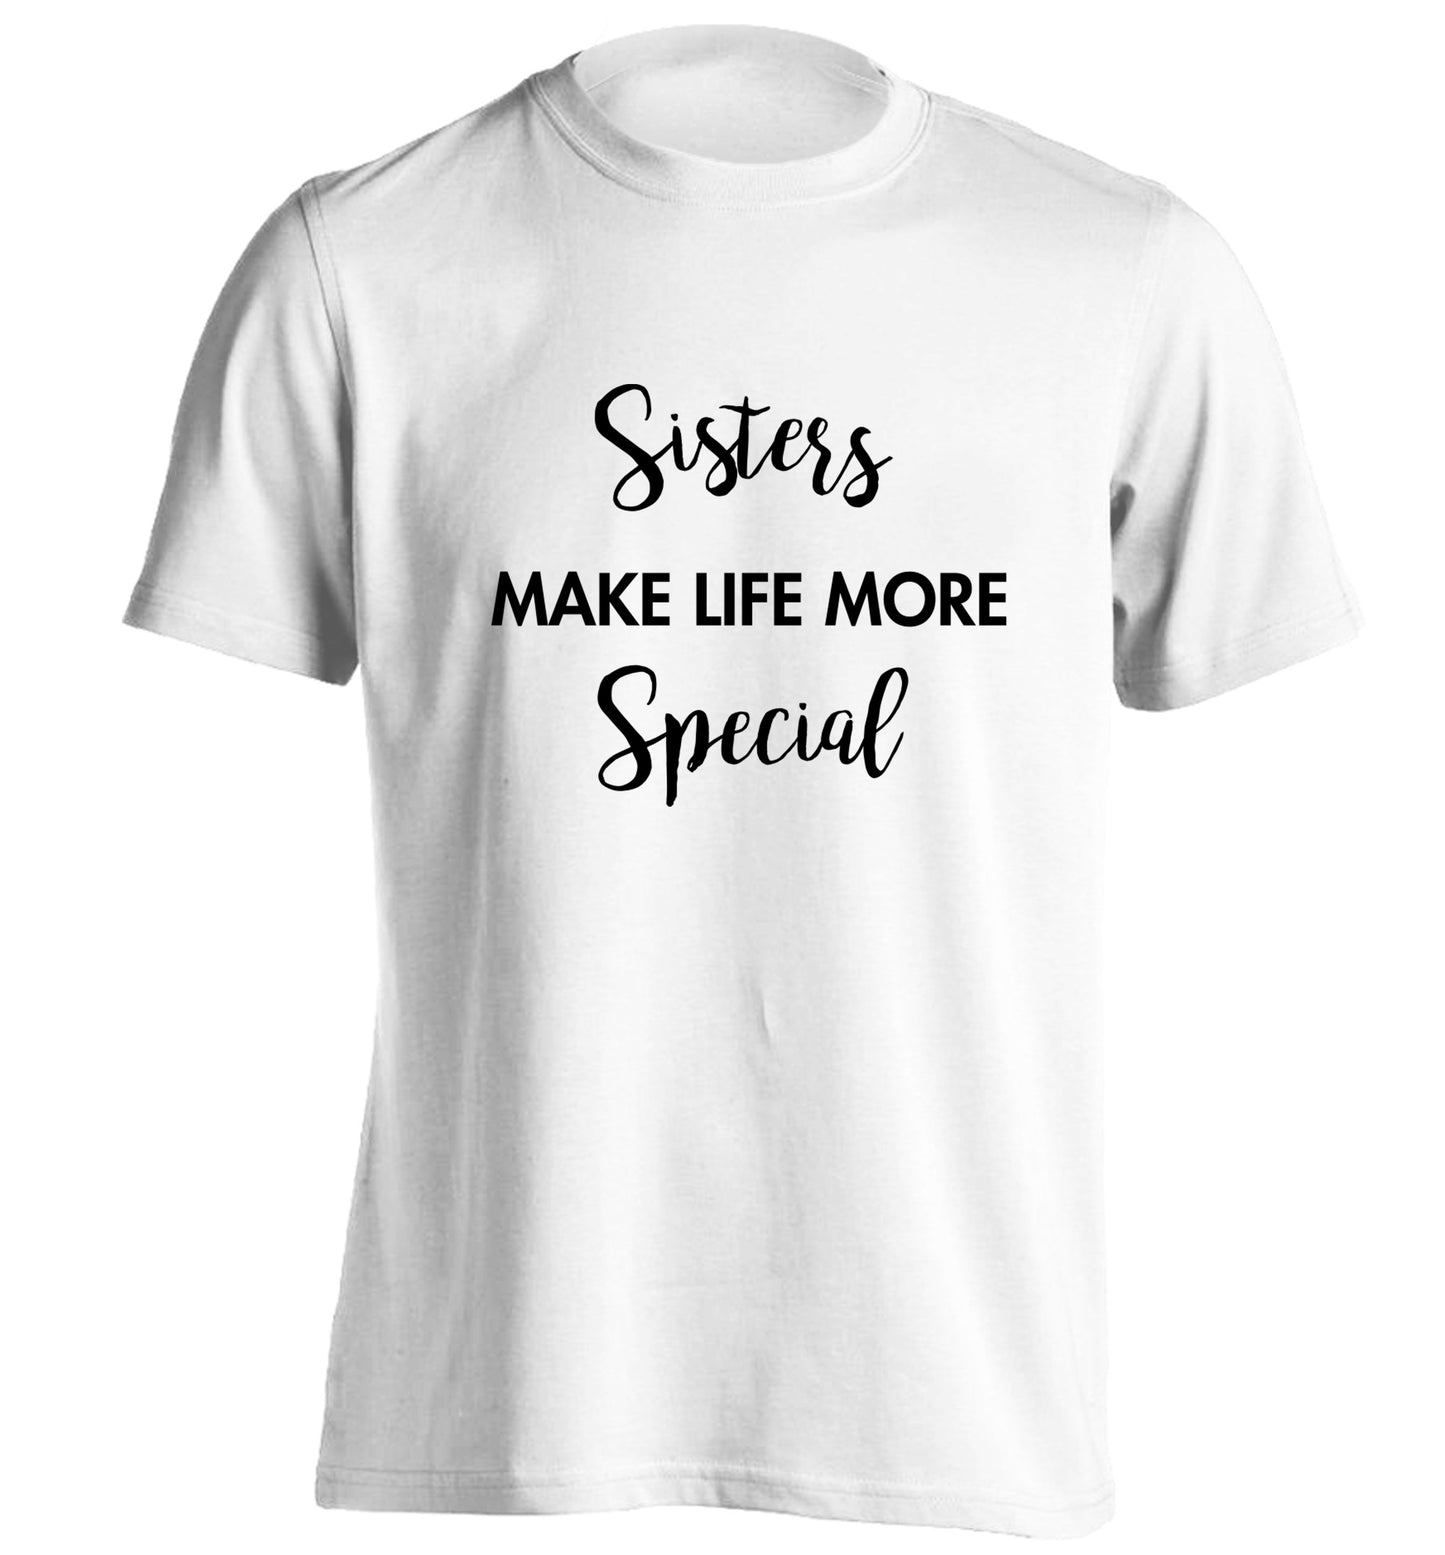 Sisters make life more special adults unisex white Tshirt 2XL